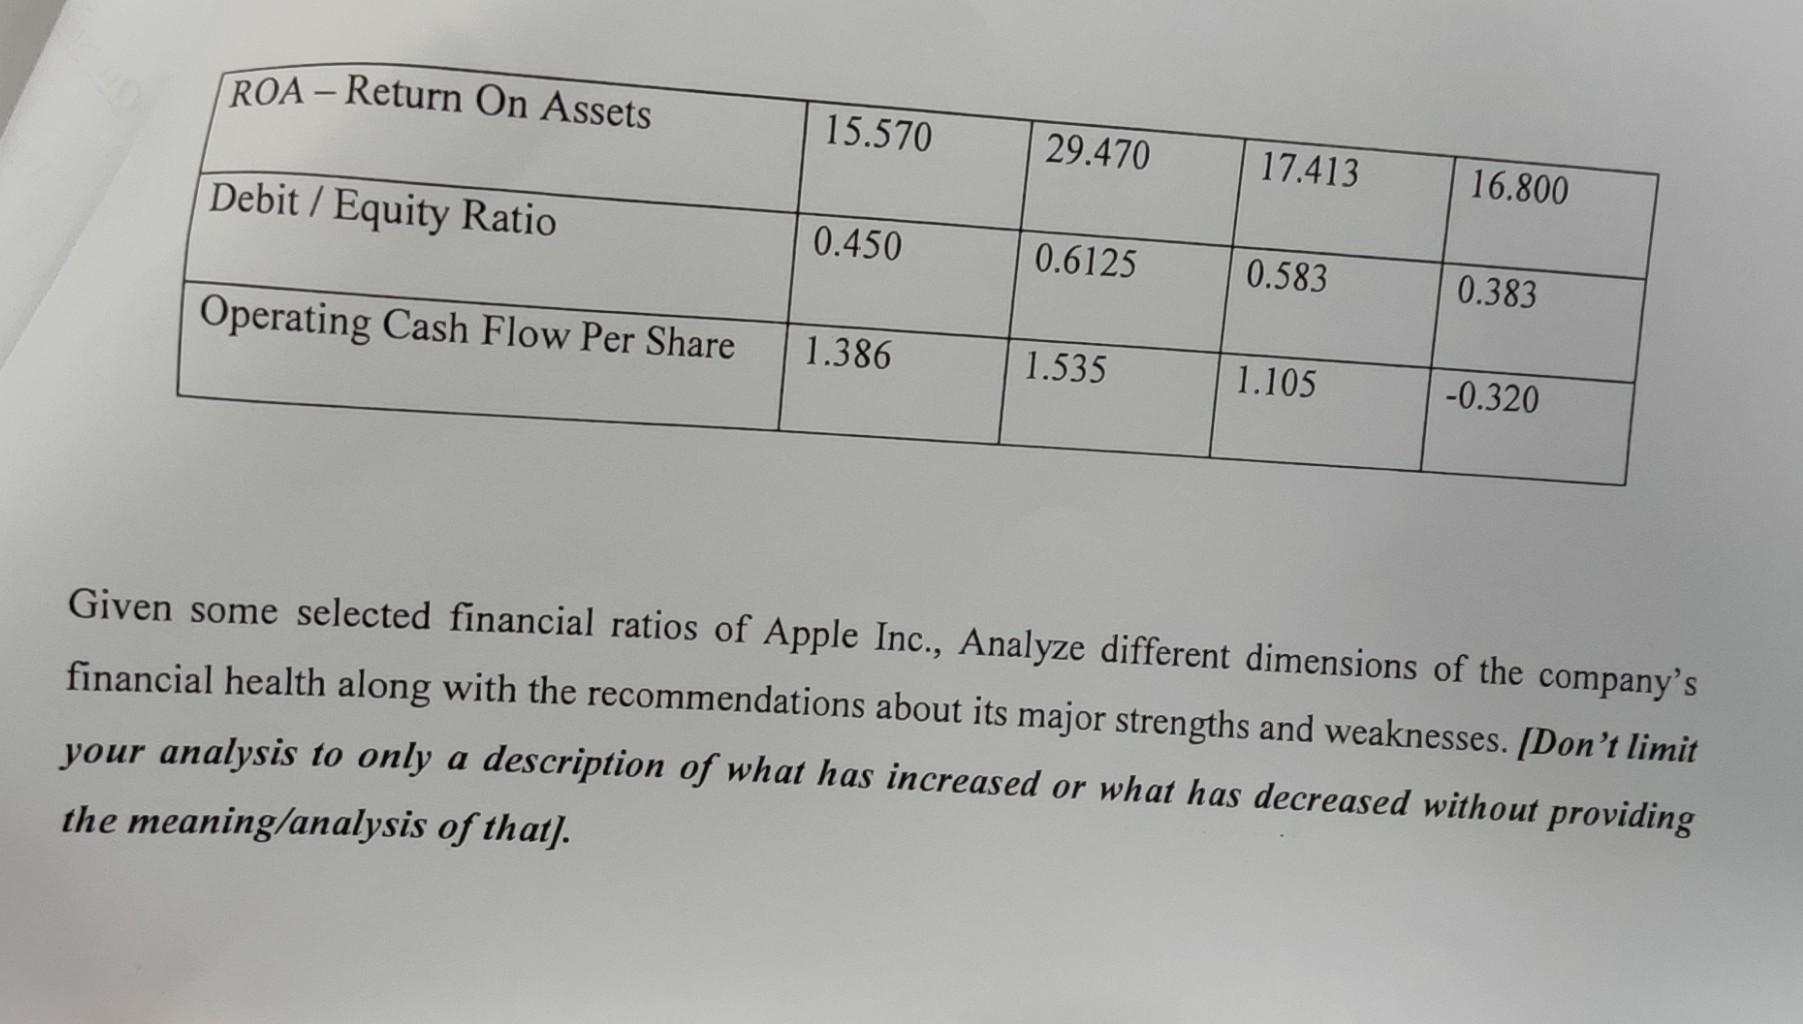 Given some selected financial ratios of Apple Inc., Analyze different dimensions of the companys financial health along with